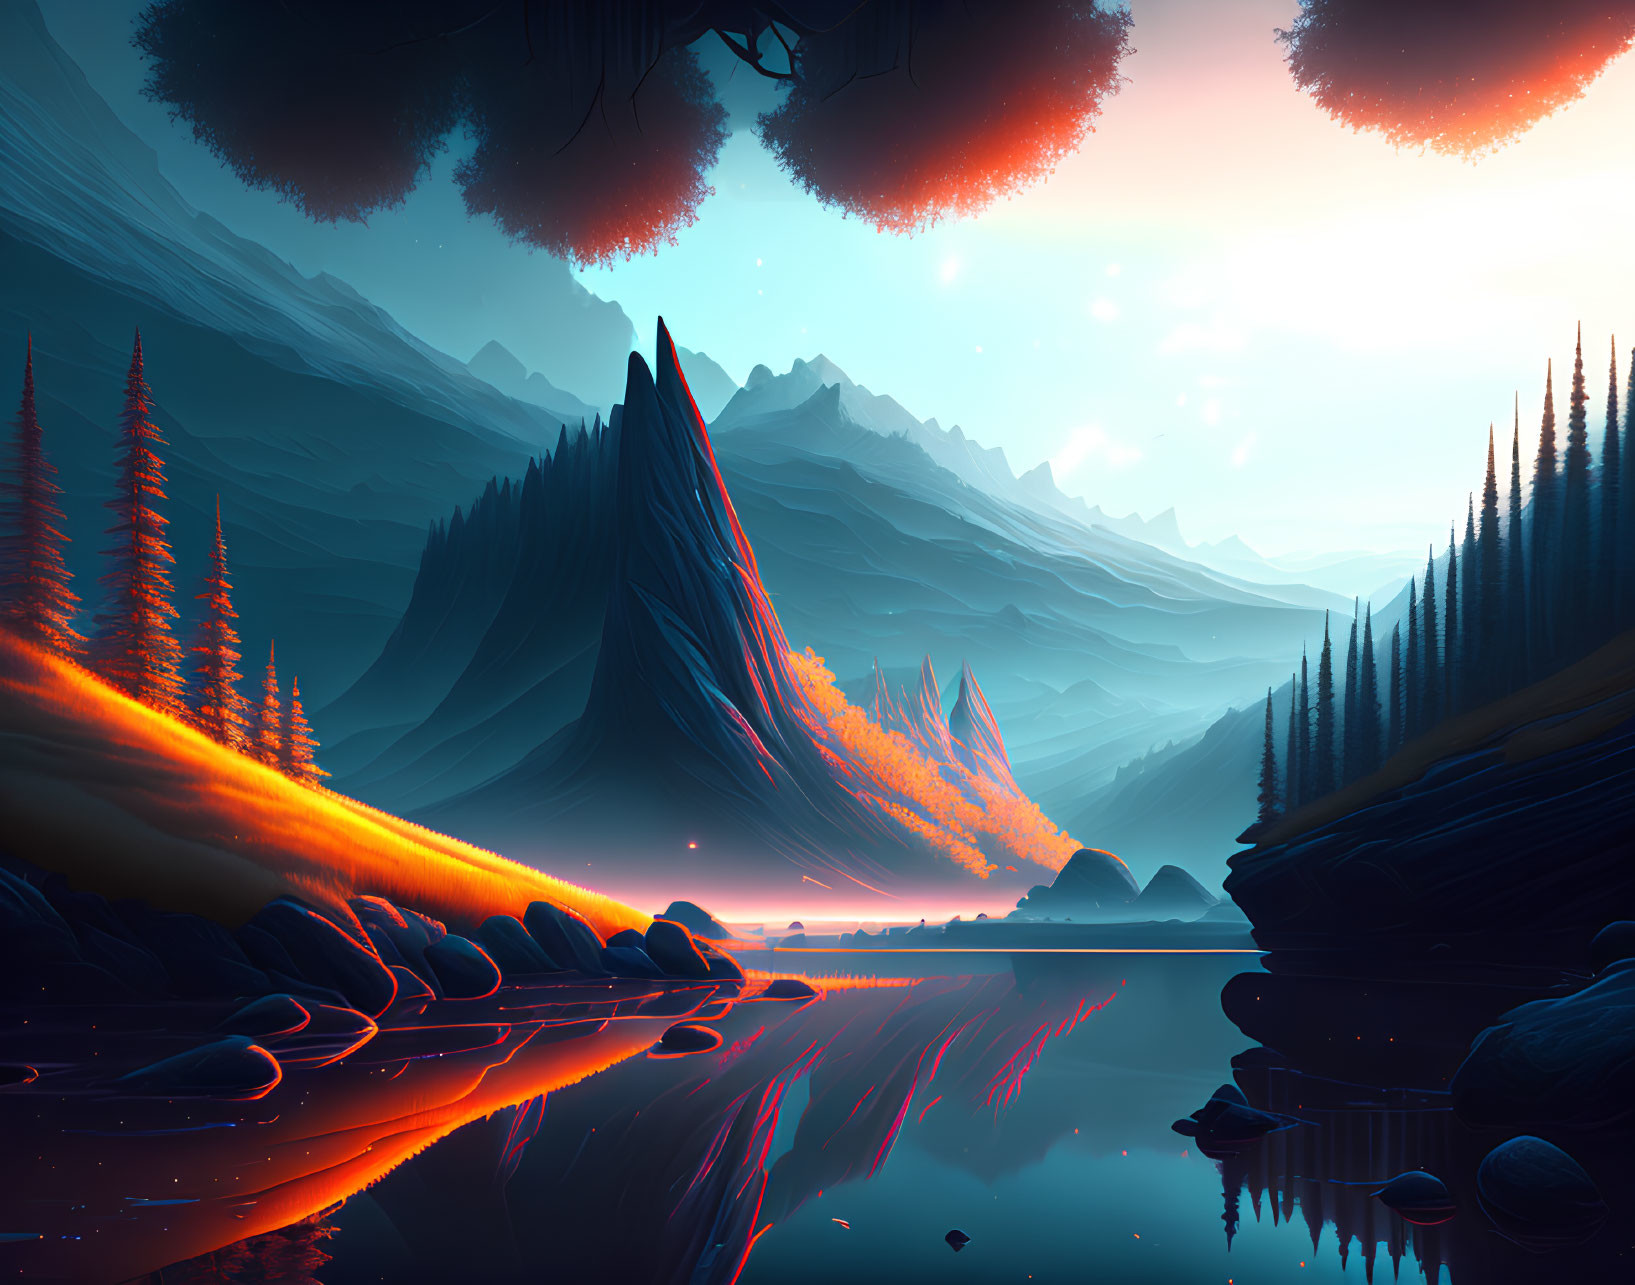 Majestic mountains and glowing flora in serene digital landscape